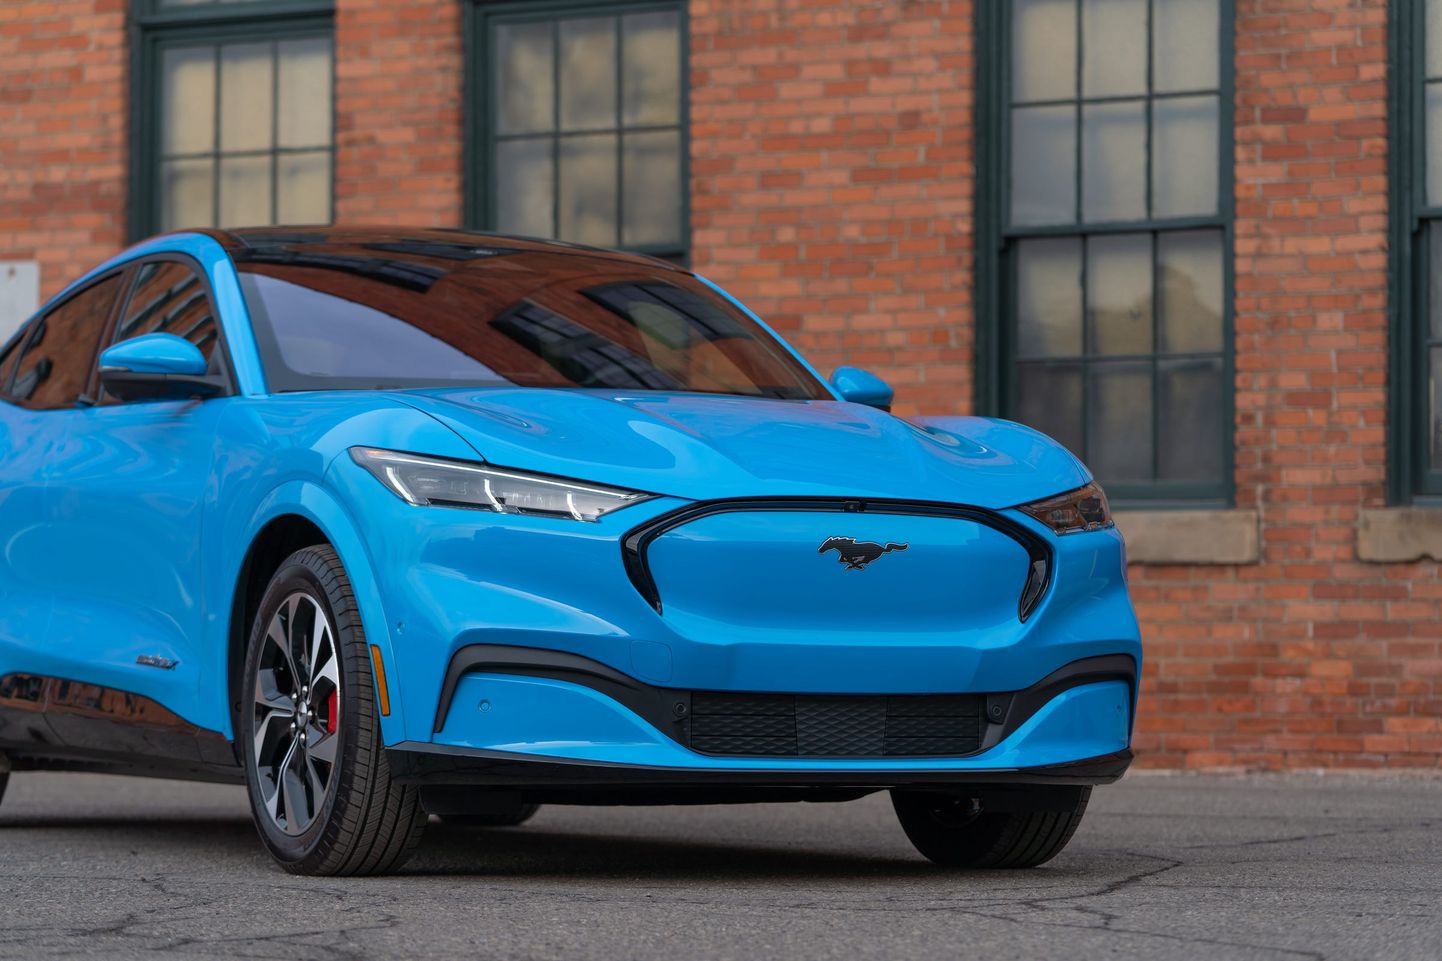 February 11, 2021, USA: A 2021 Mustang Mach-E 4X model outside of the Ford Piquette Avenue Plant in Detroit on January 14, 2021. (Credit Image: © TNS via ZUMA Wire)